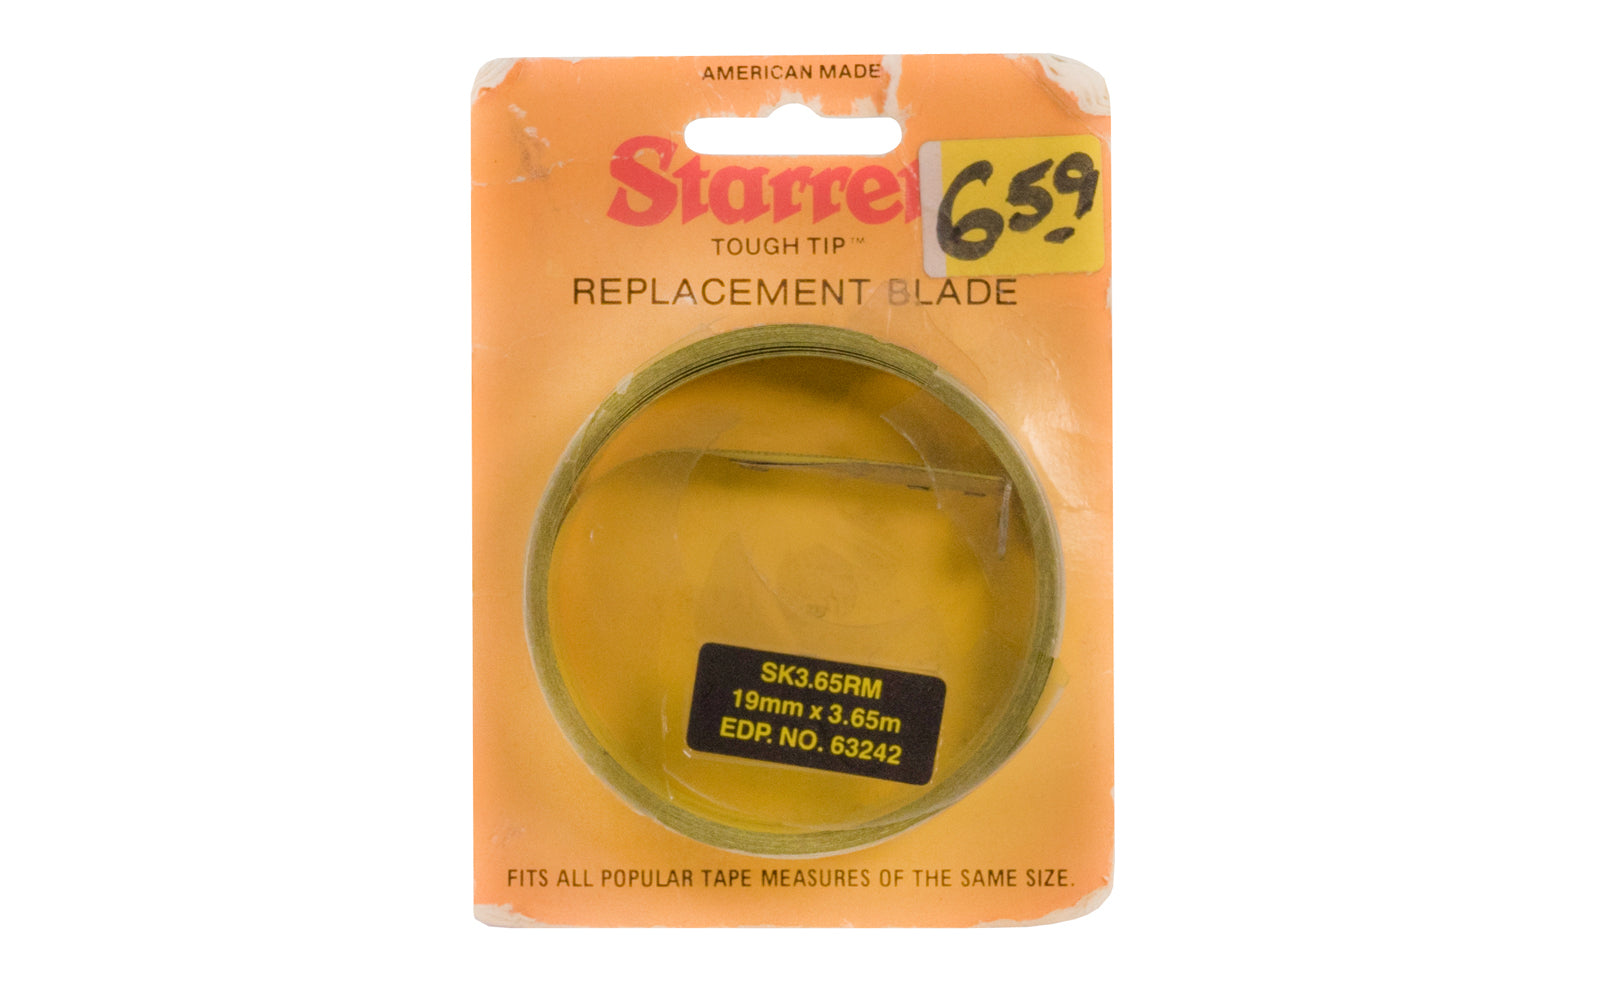 Starrett Replacement Measuring Tape Blade - 19 mm x 3.65m. Metric graduations. Rust resistant lacquered blade. Tempered steel & positive locking. Model SK3.65RM. Made in USA.